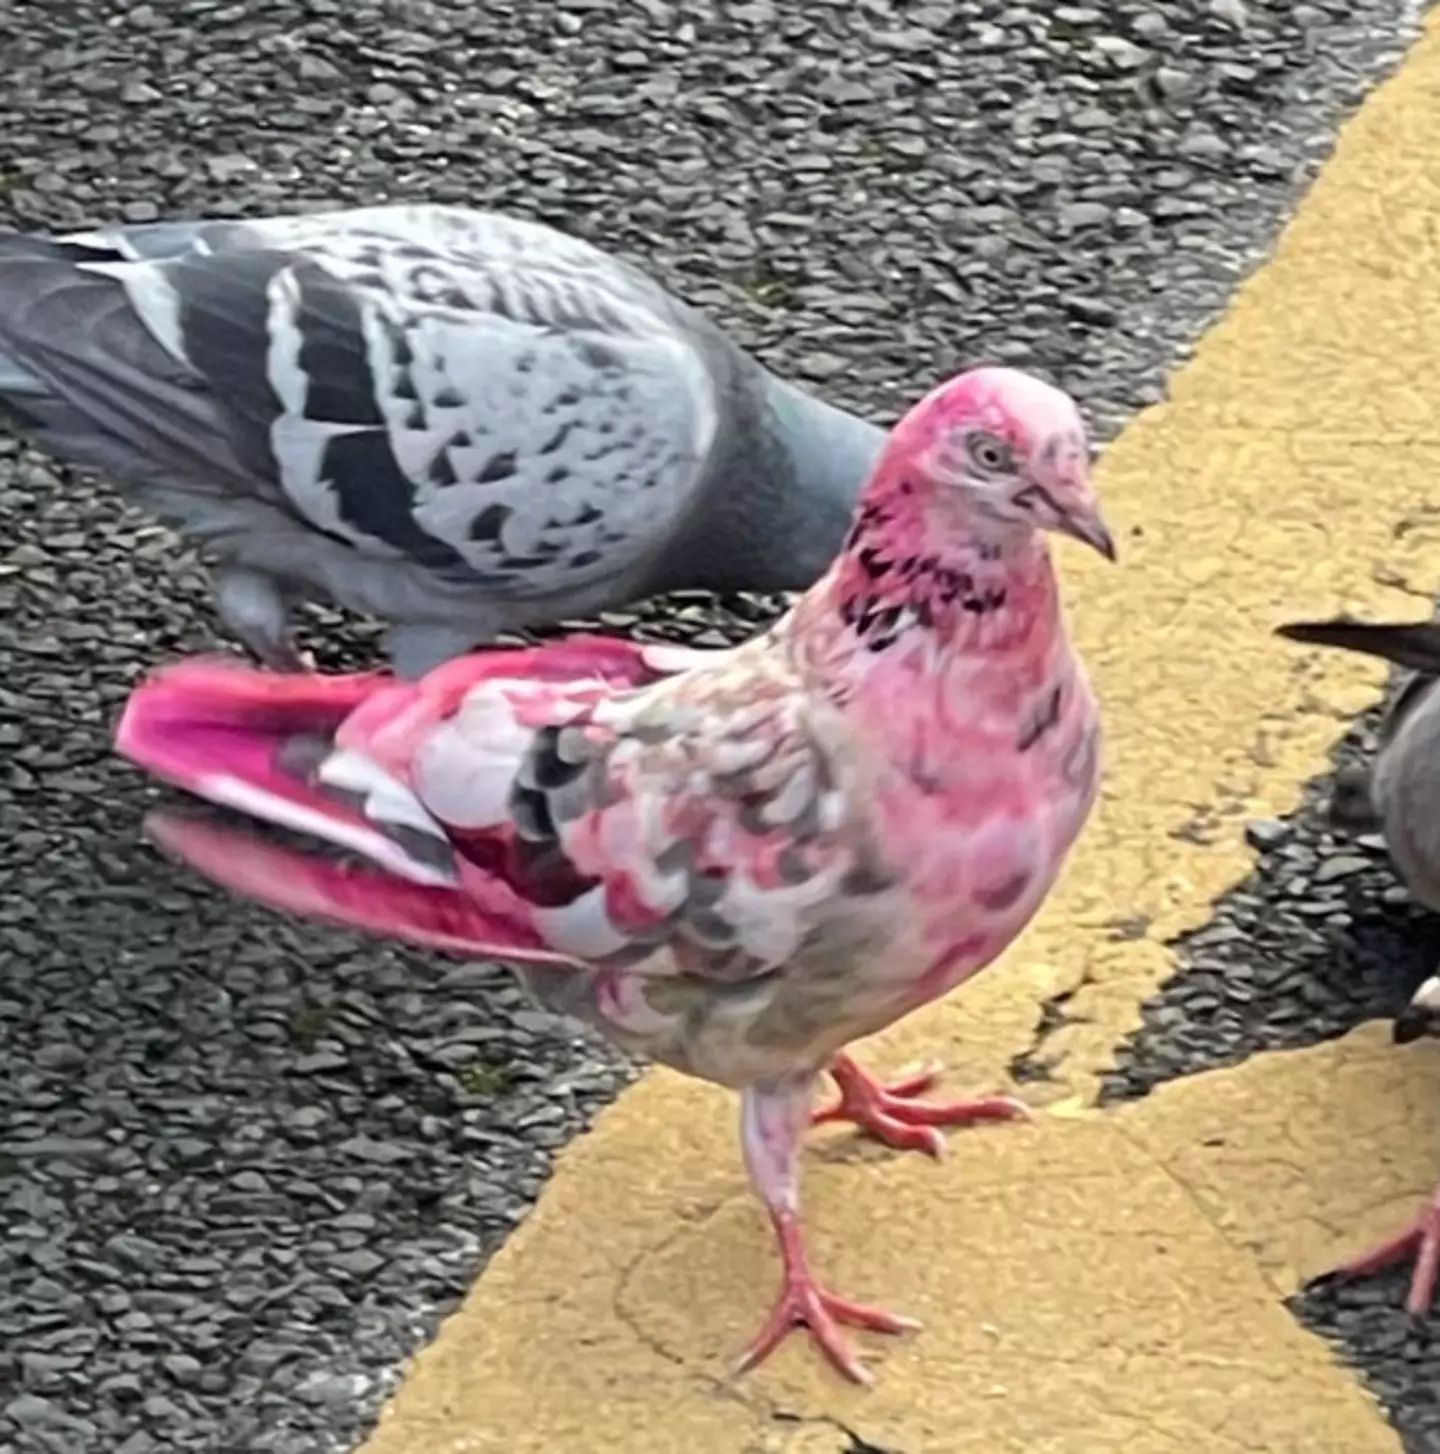 GMP Bury North shared a photo of the pink pigeon to Facebook.